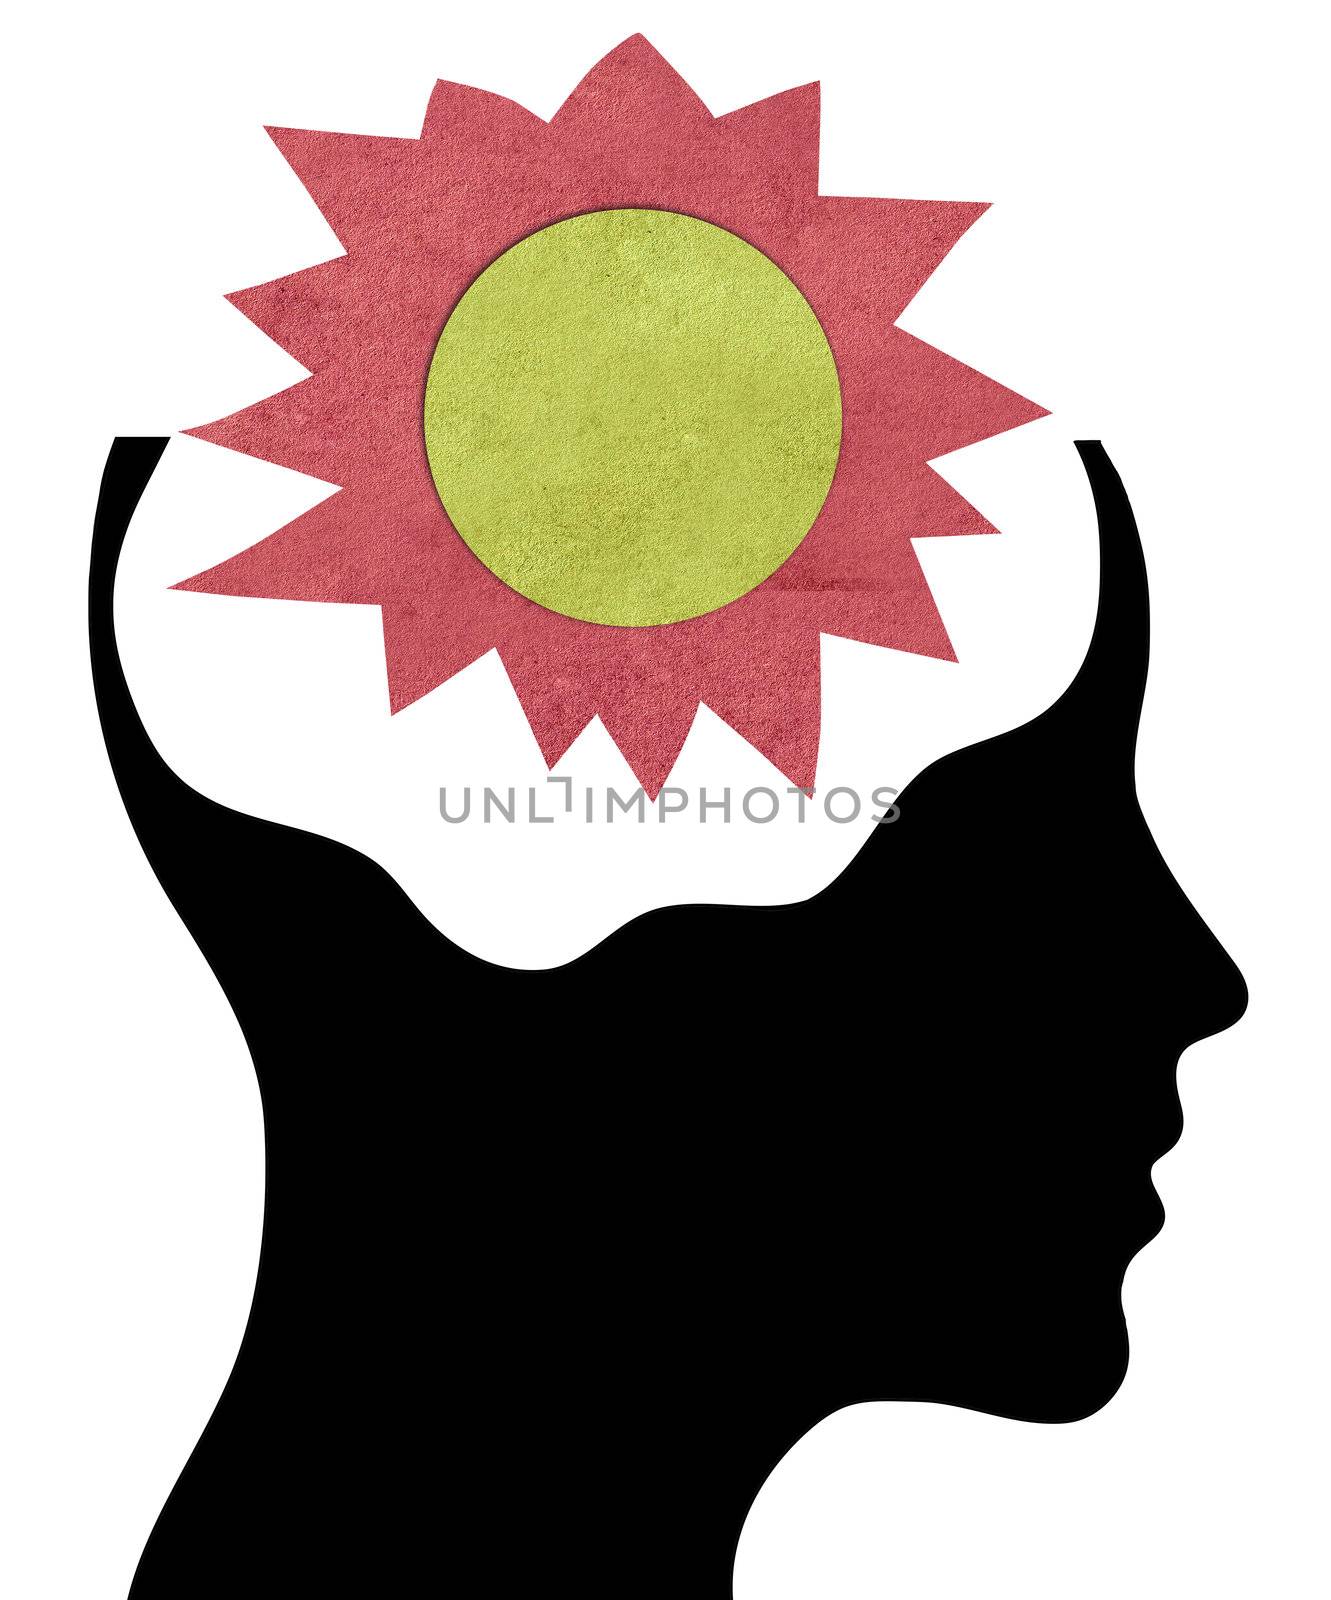 Human head silhouette with paper sun on the brain